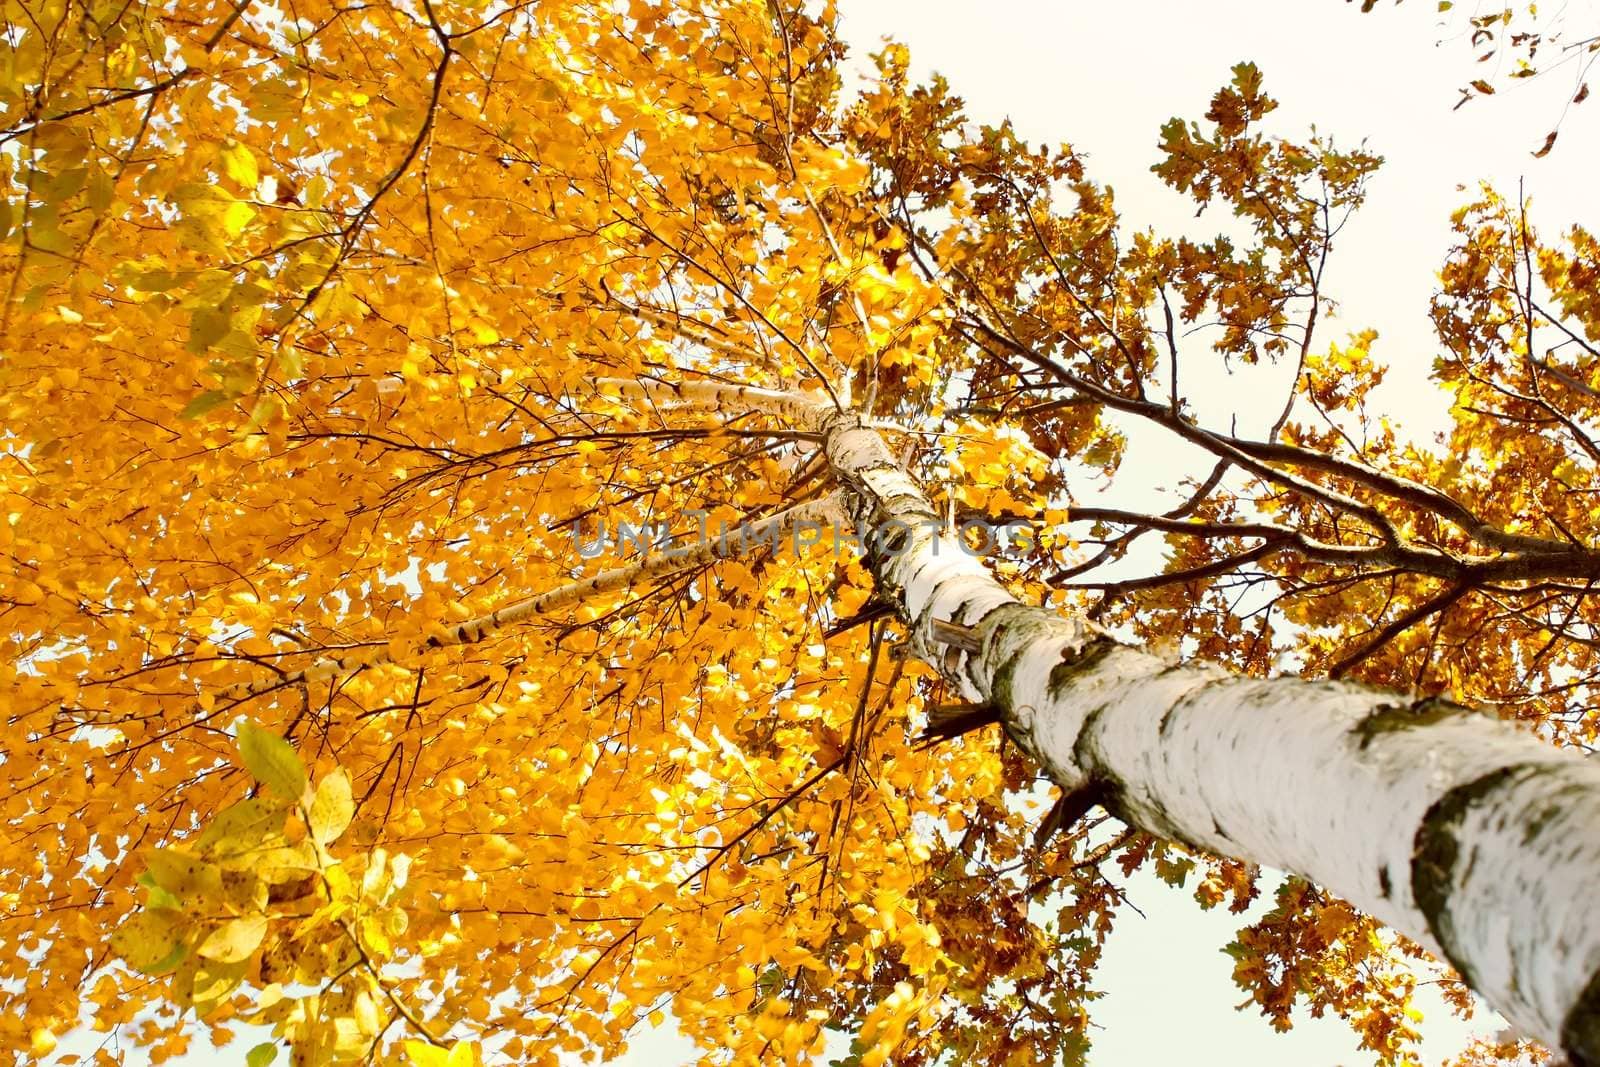 A birch tree in autumn season. Lateral view. The branches of yellow leaves driveth wind